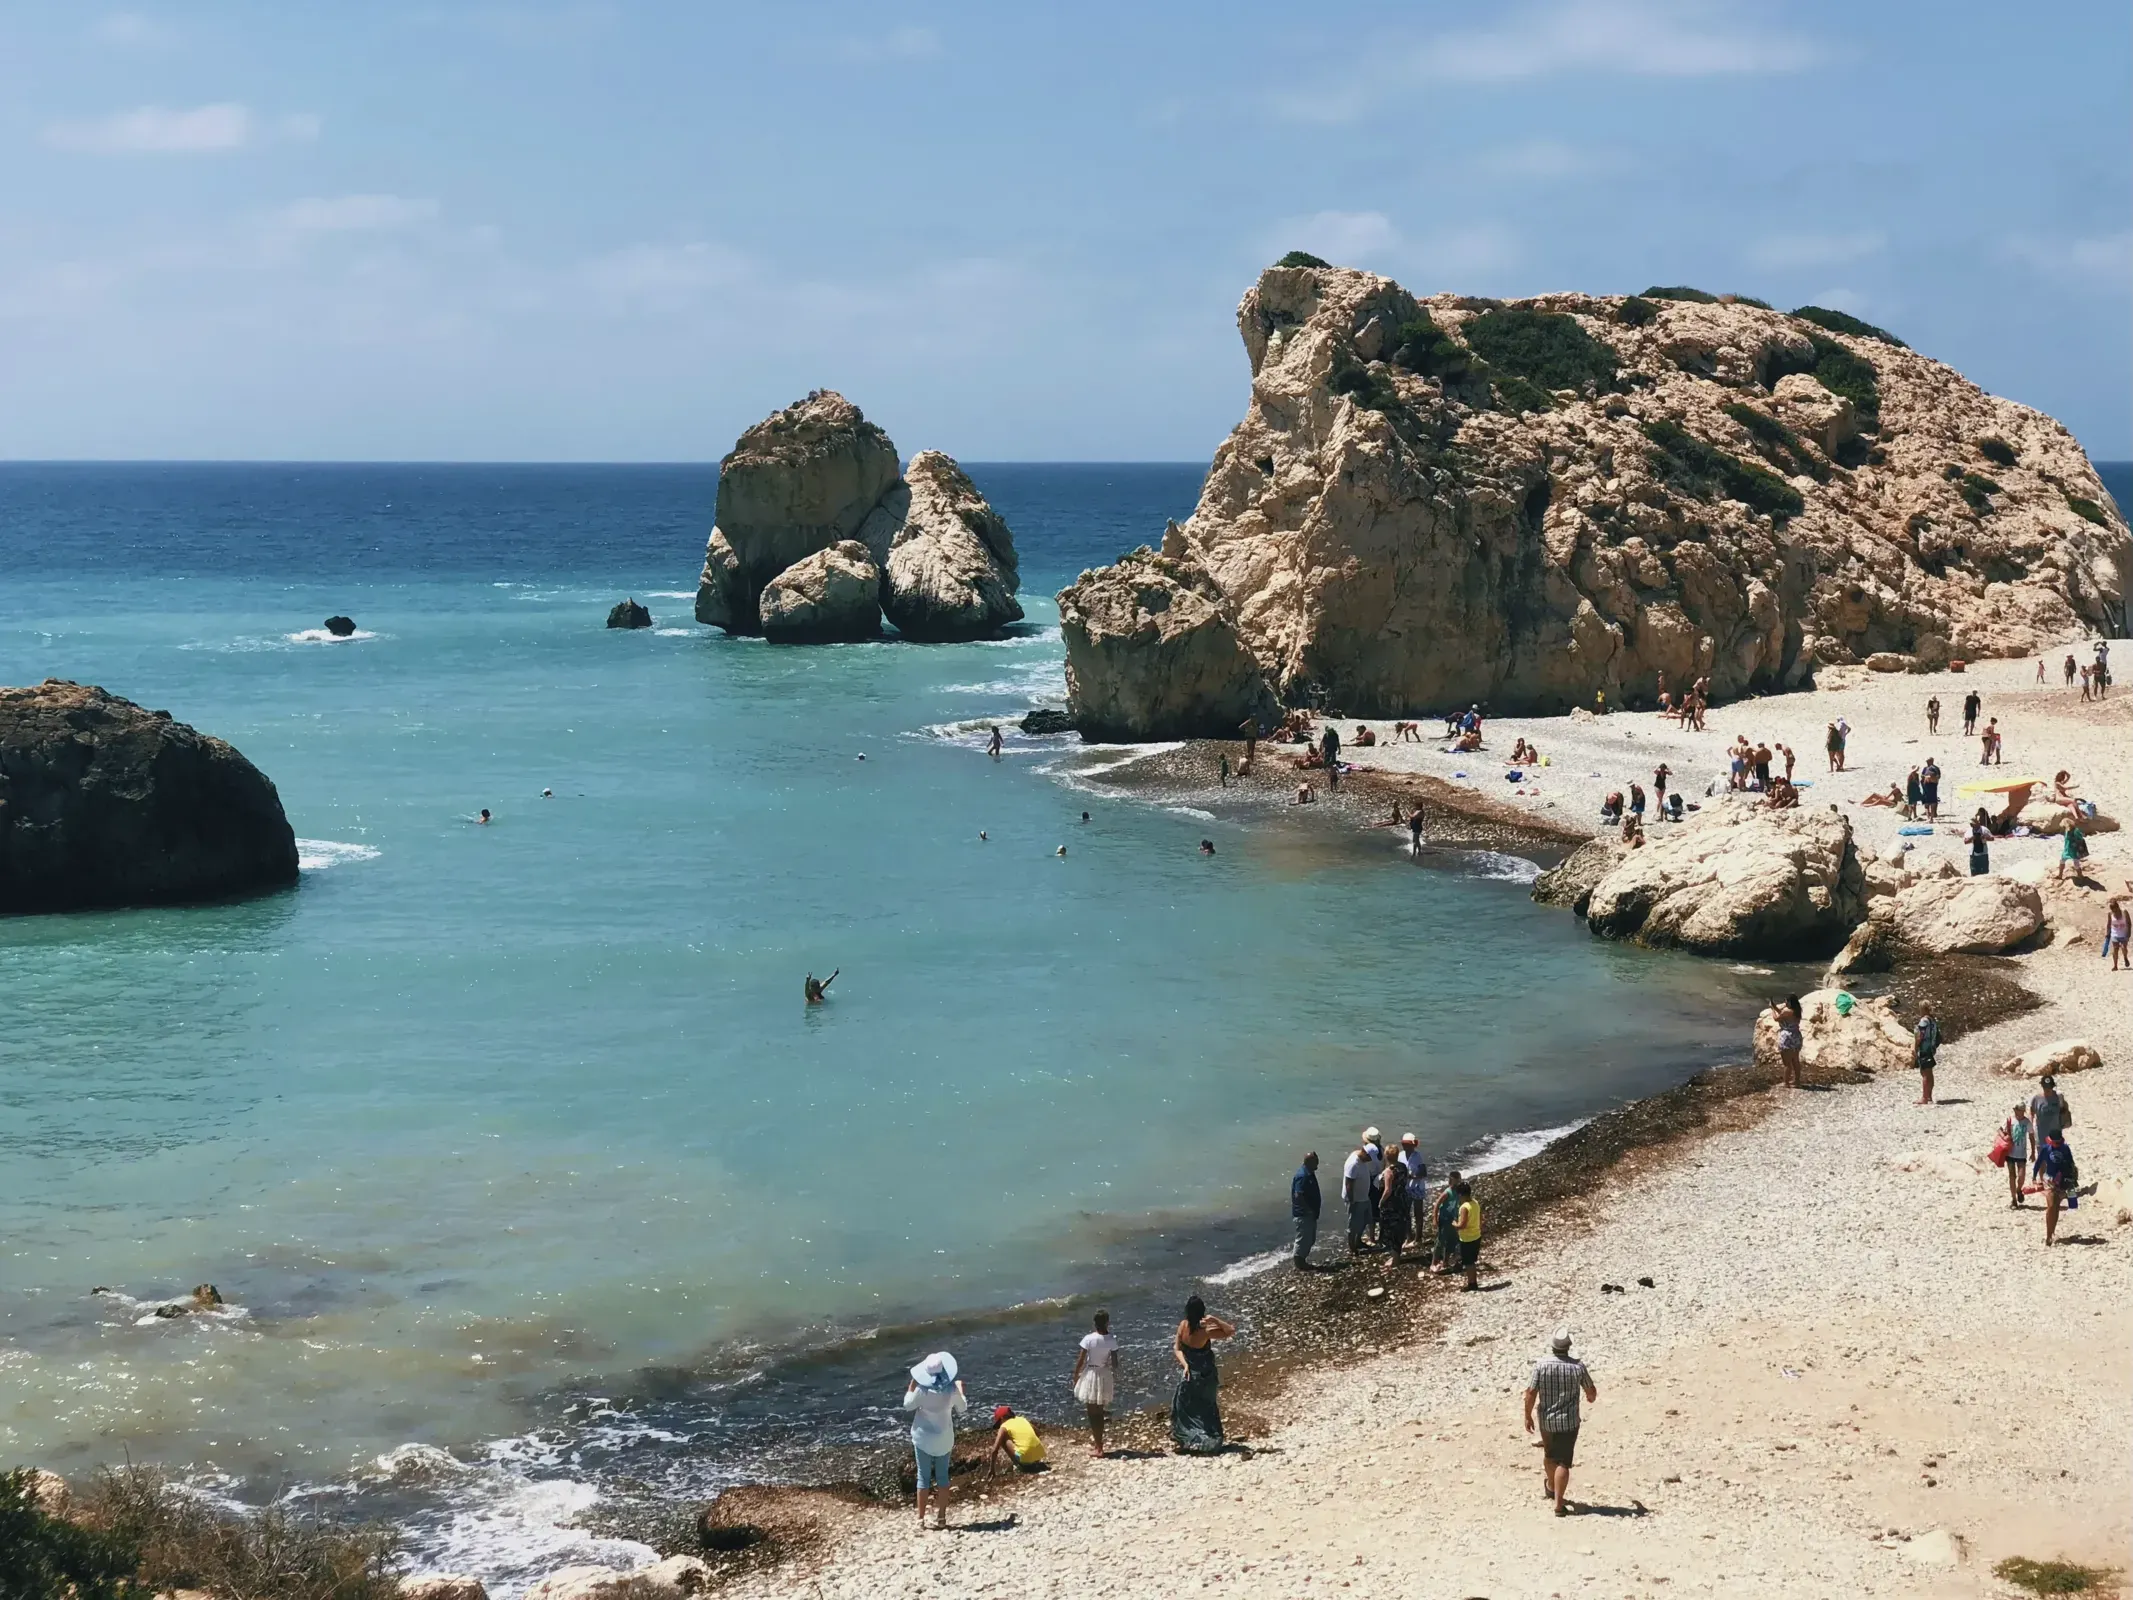 Group of people enjoying the beach with the iconic Petra tou Romiou rock formation in the background.